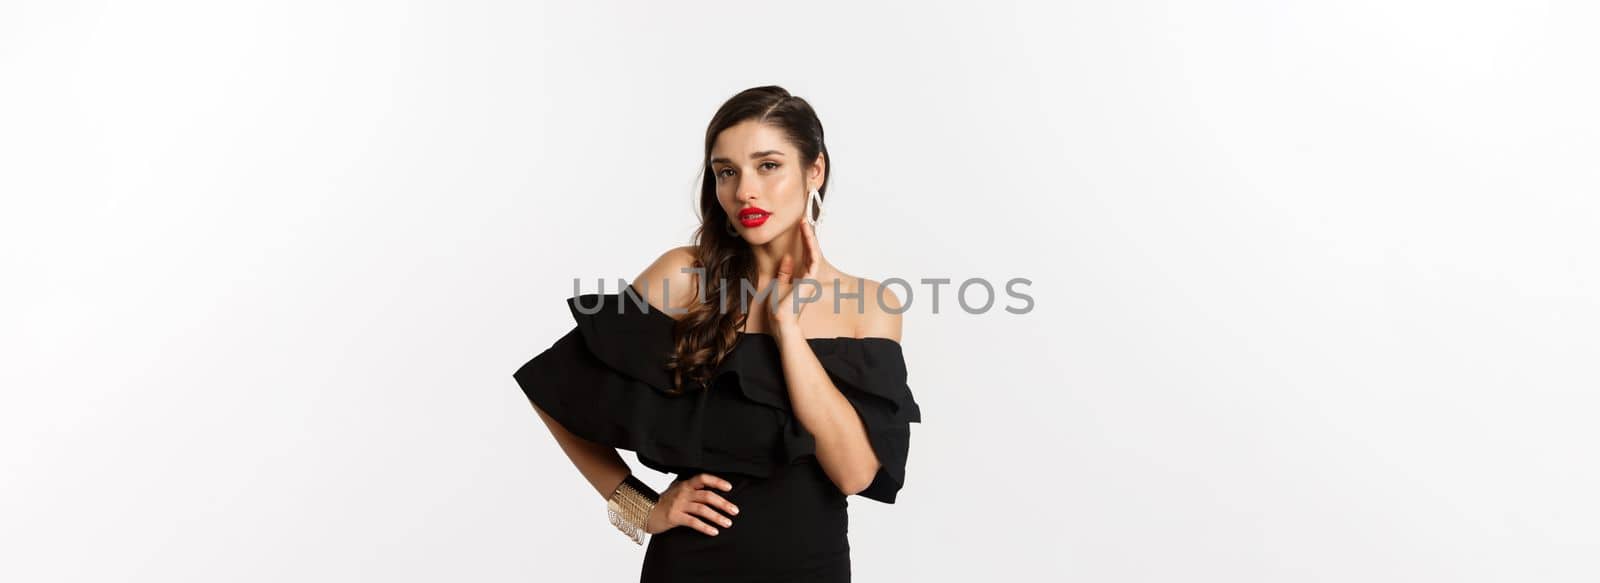 Sensual young woman in black dress, showing her earrings and looking sexy at camera, standing over white background.